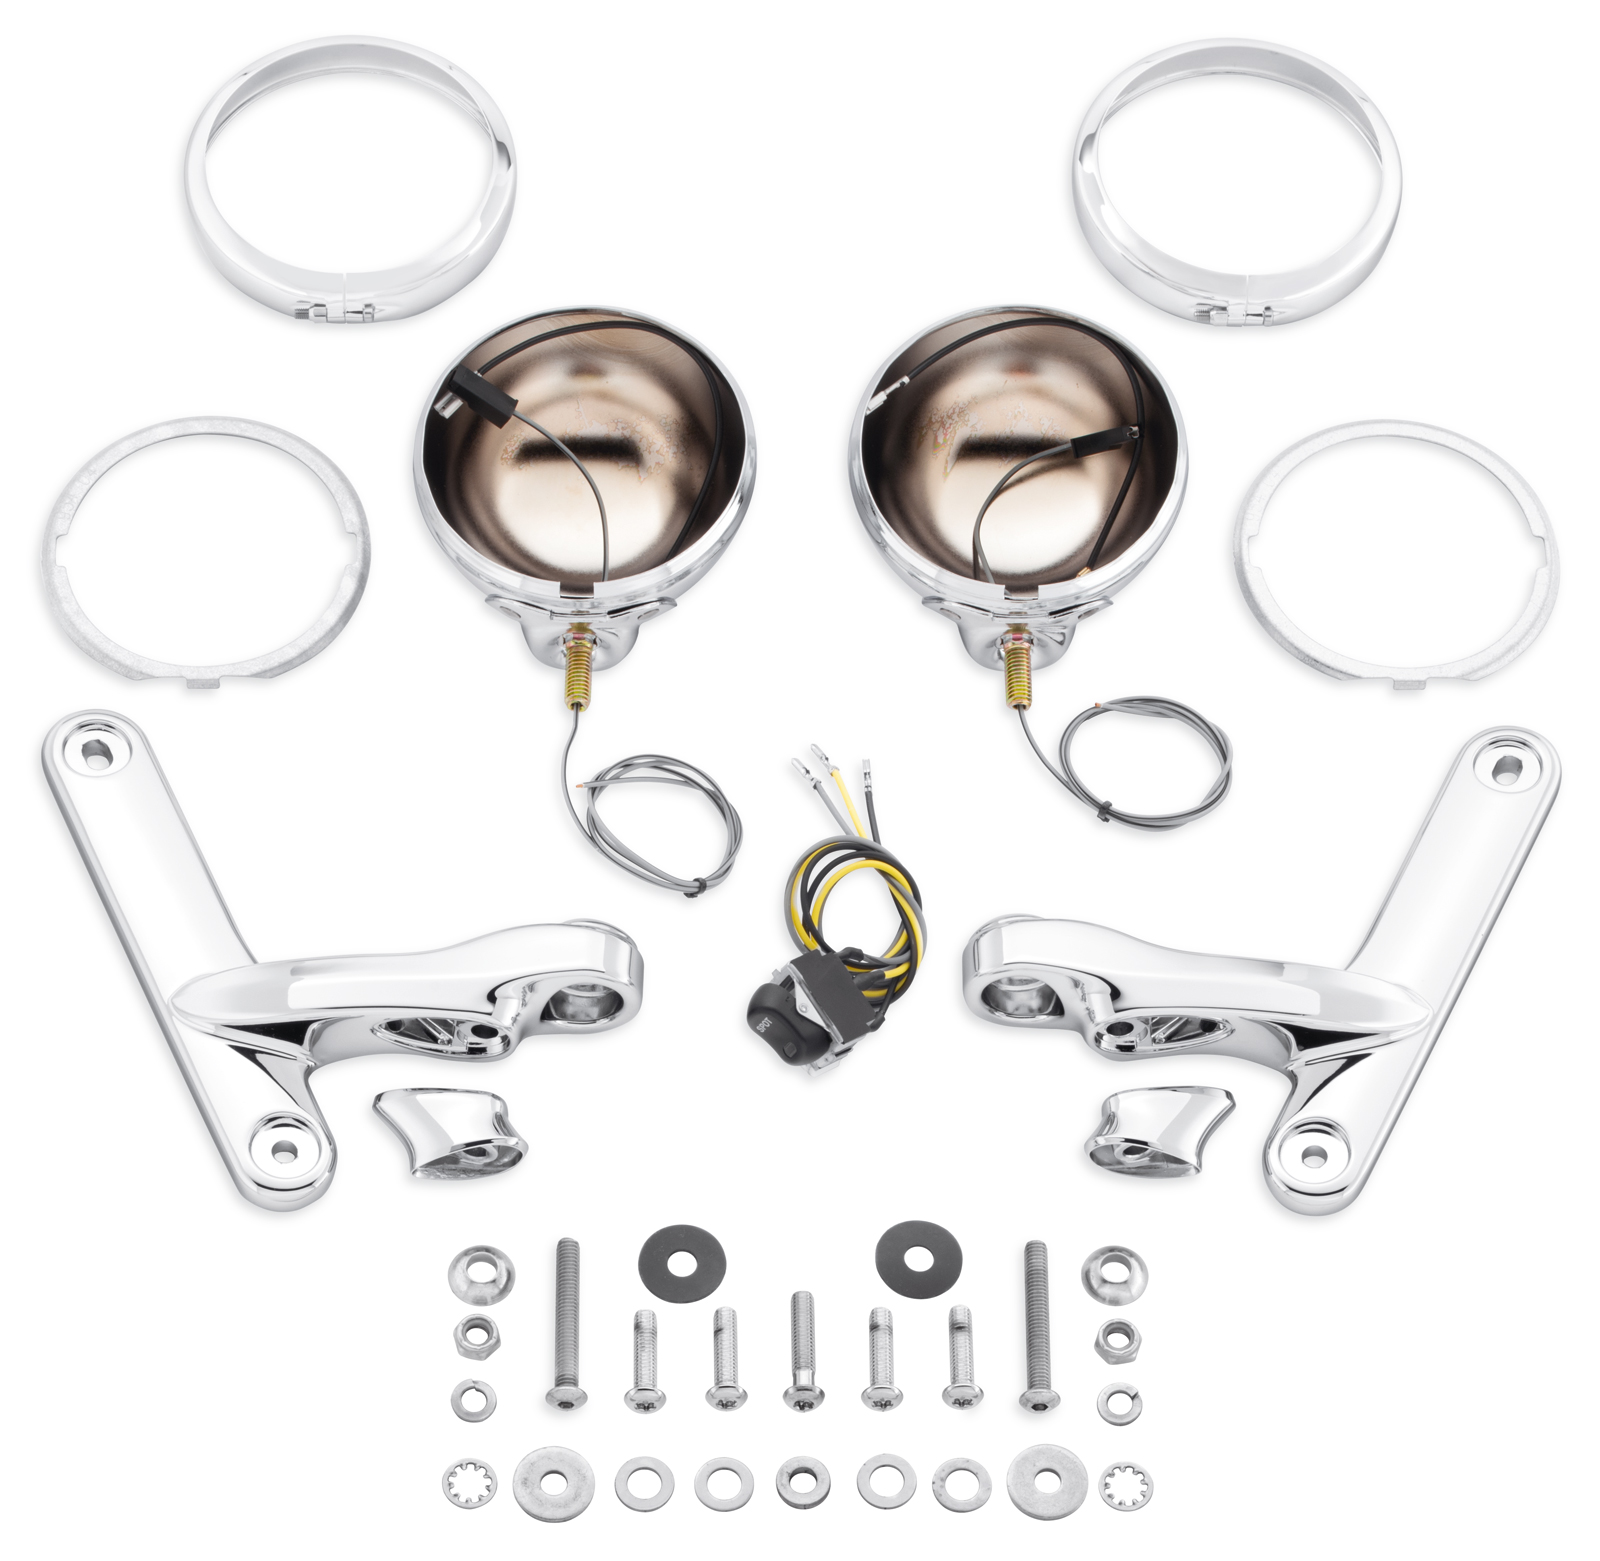 Chrome Auxiliary Lighting Brackets Kit Fit For Harley Road King Street Glide 